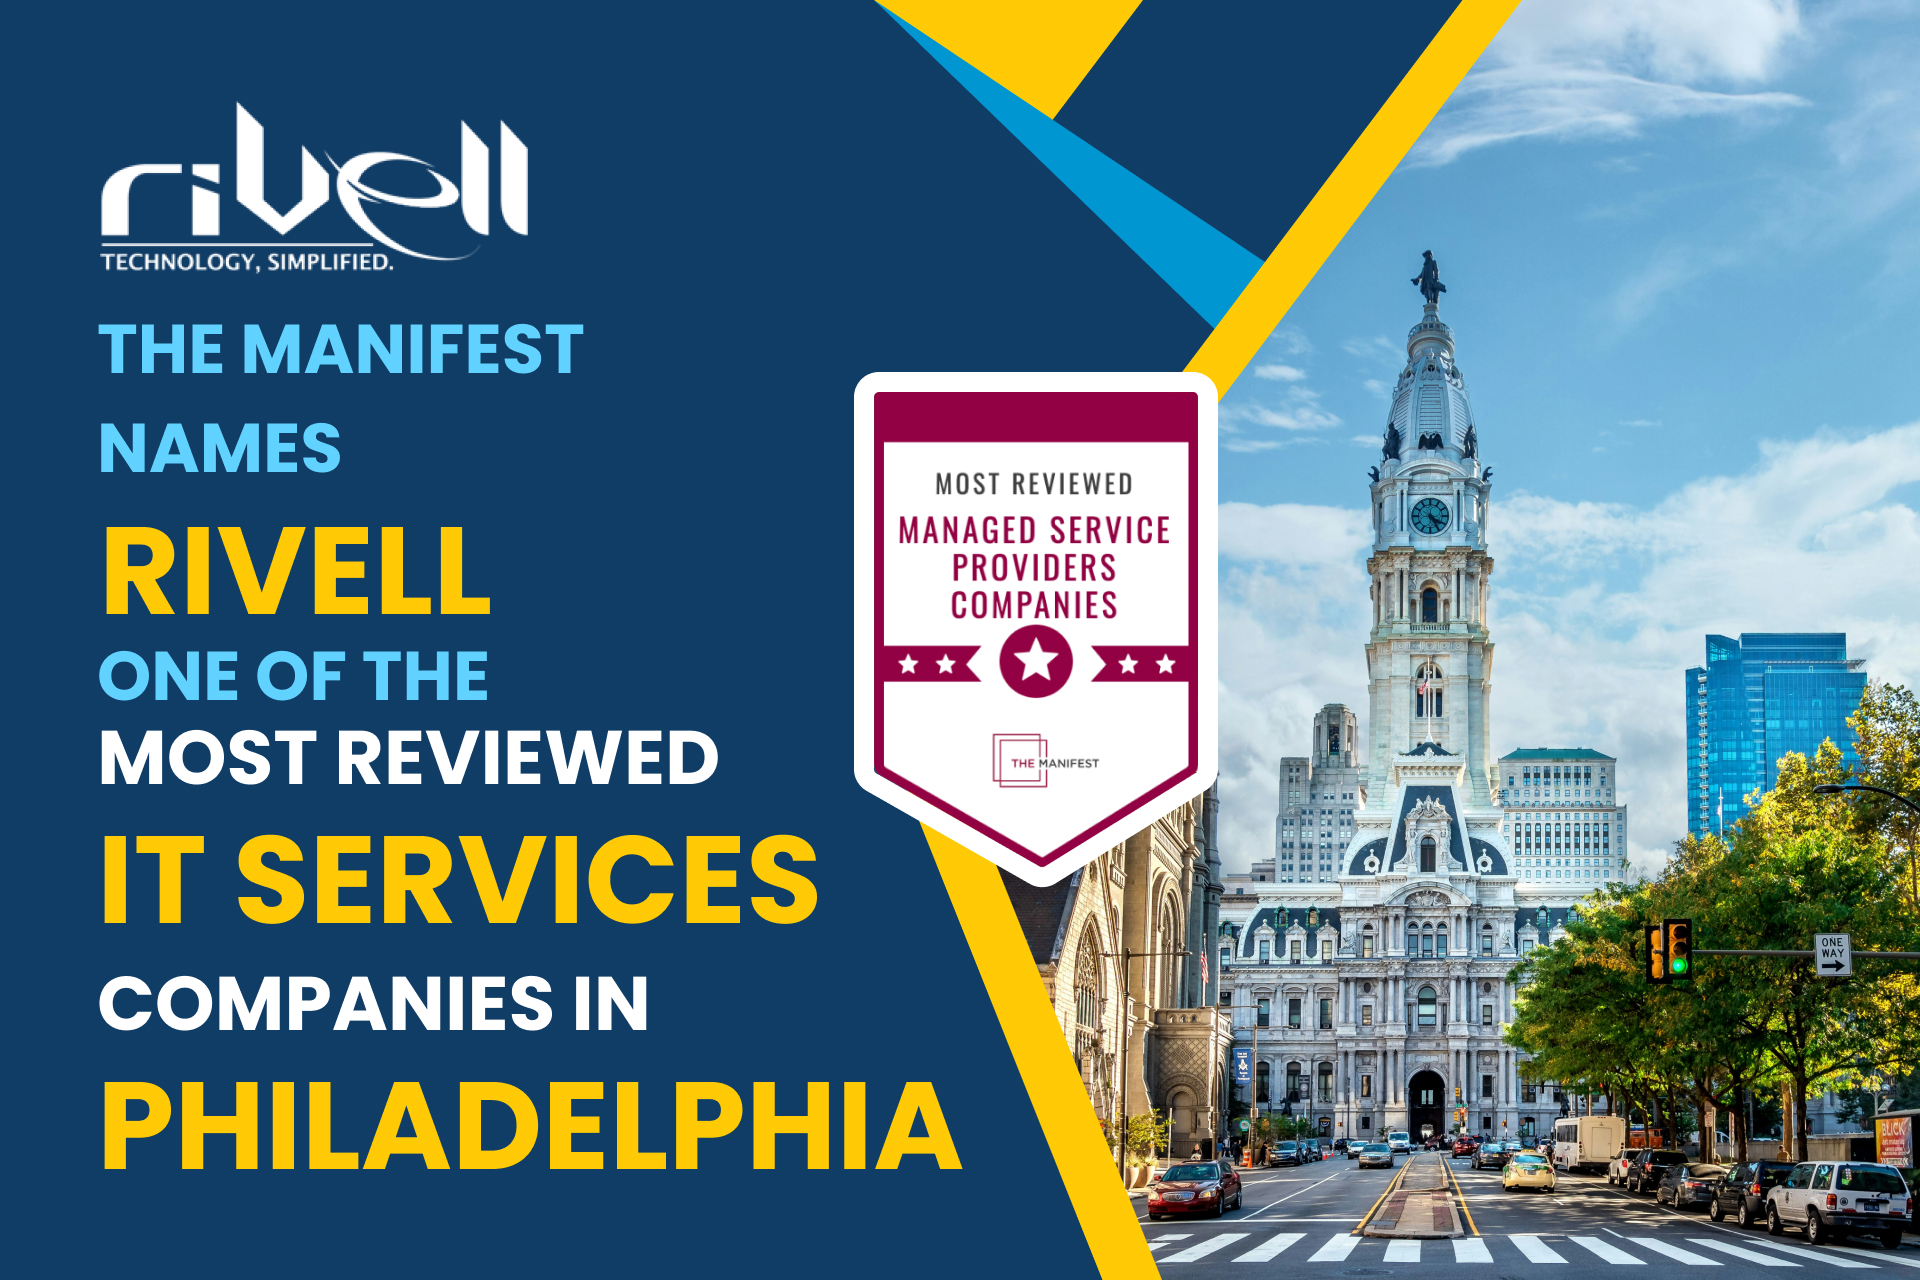 The Manifest Names Rivell as one of the Most-Reviewed IT Services Companies in Philadelphia